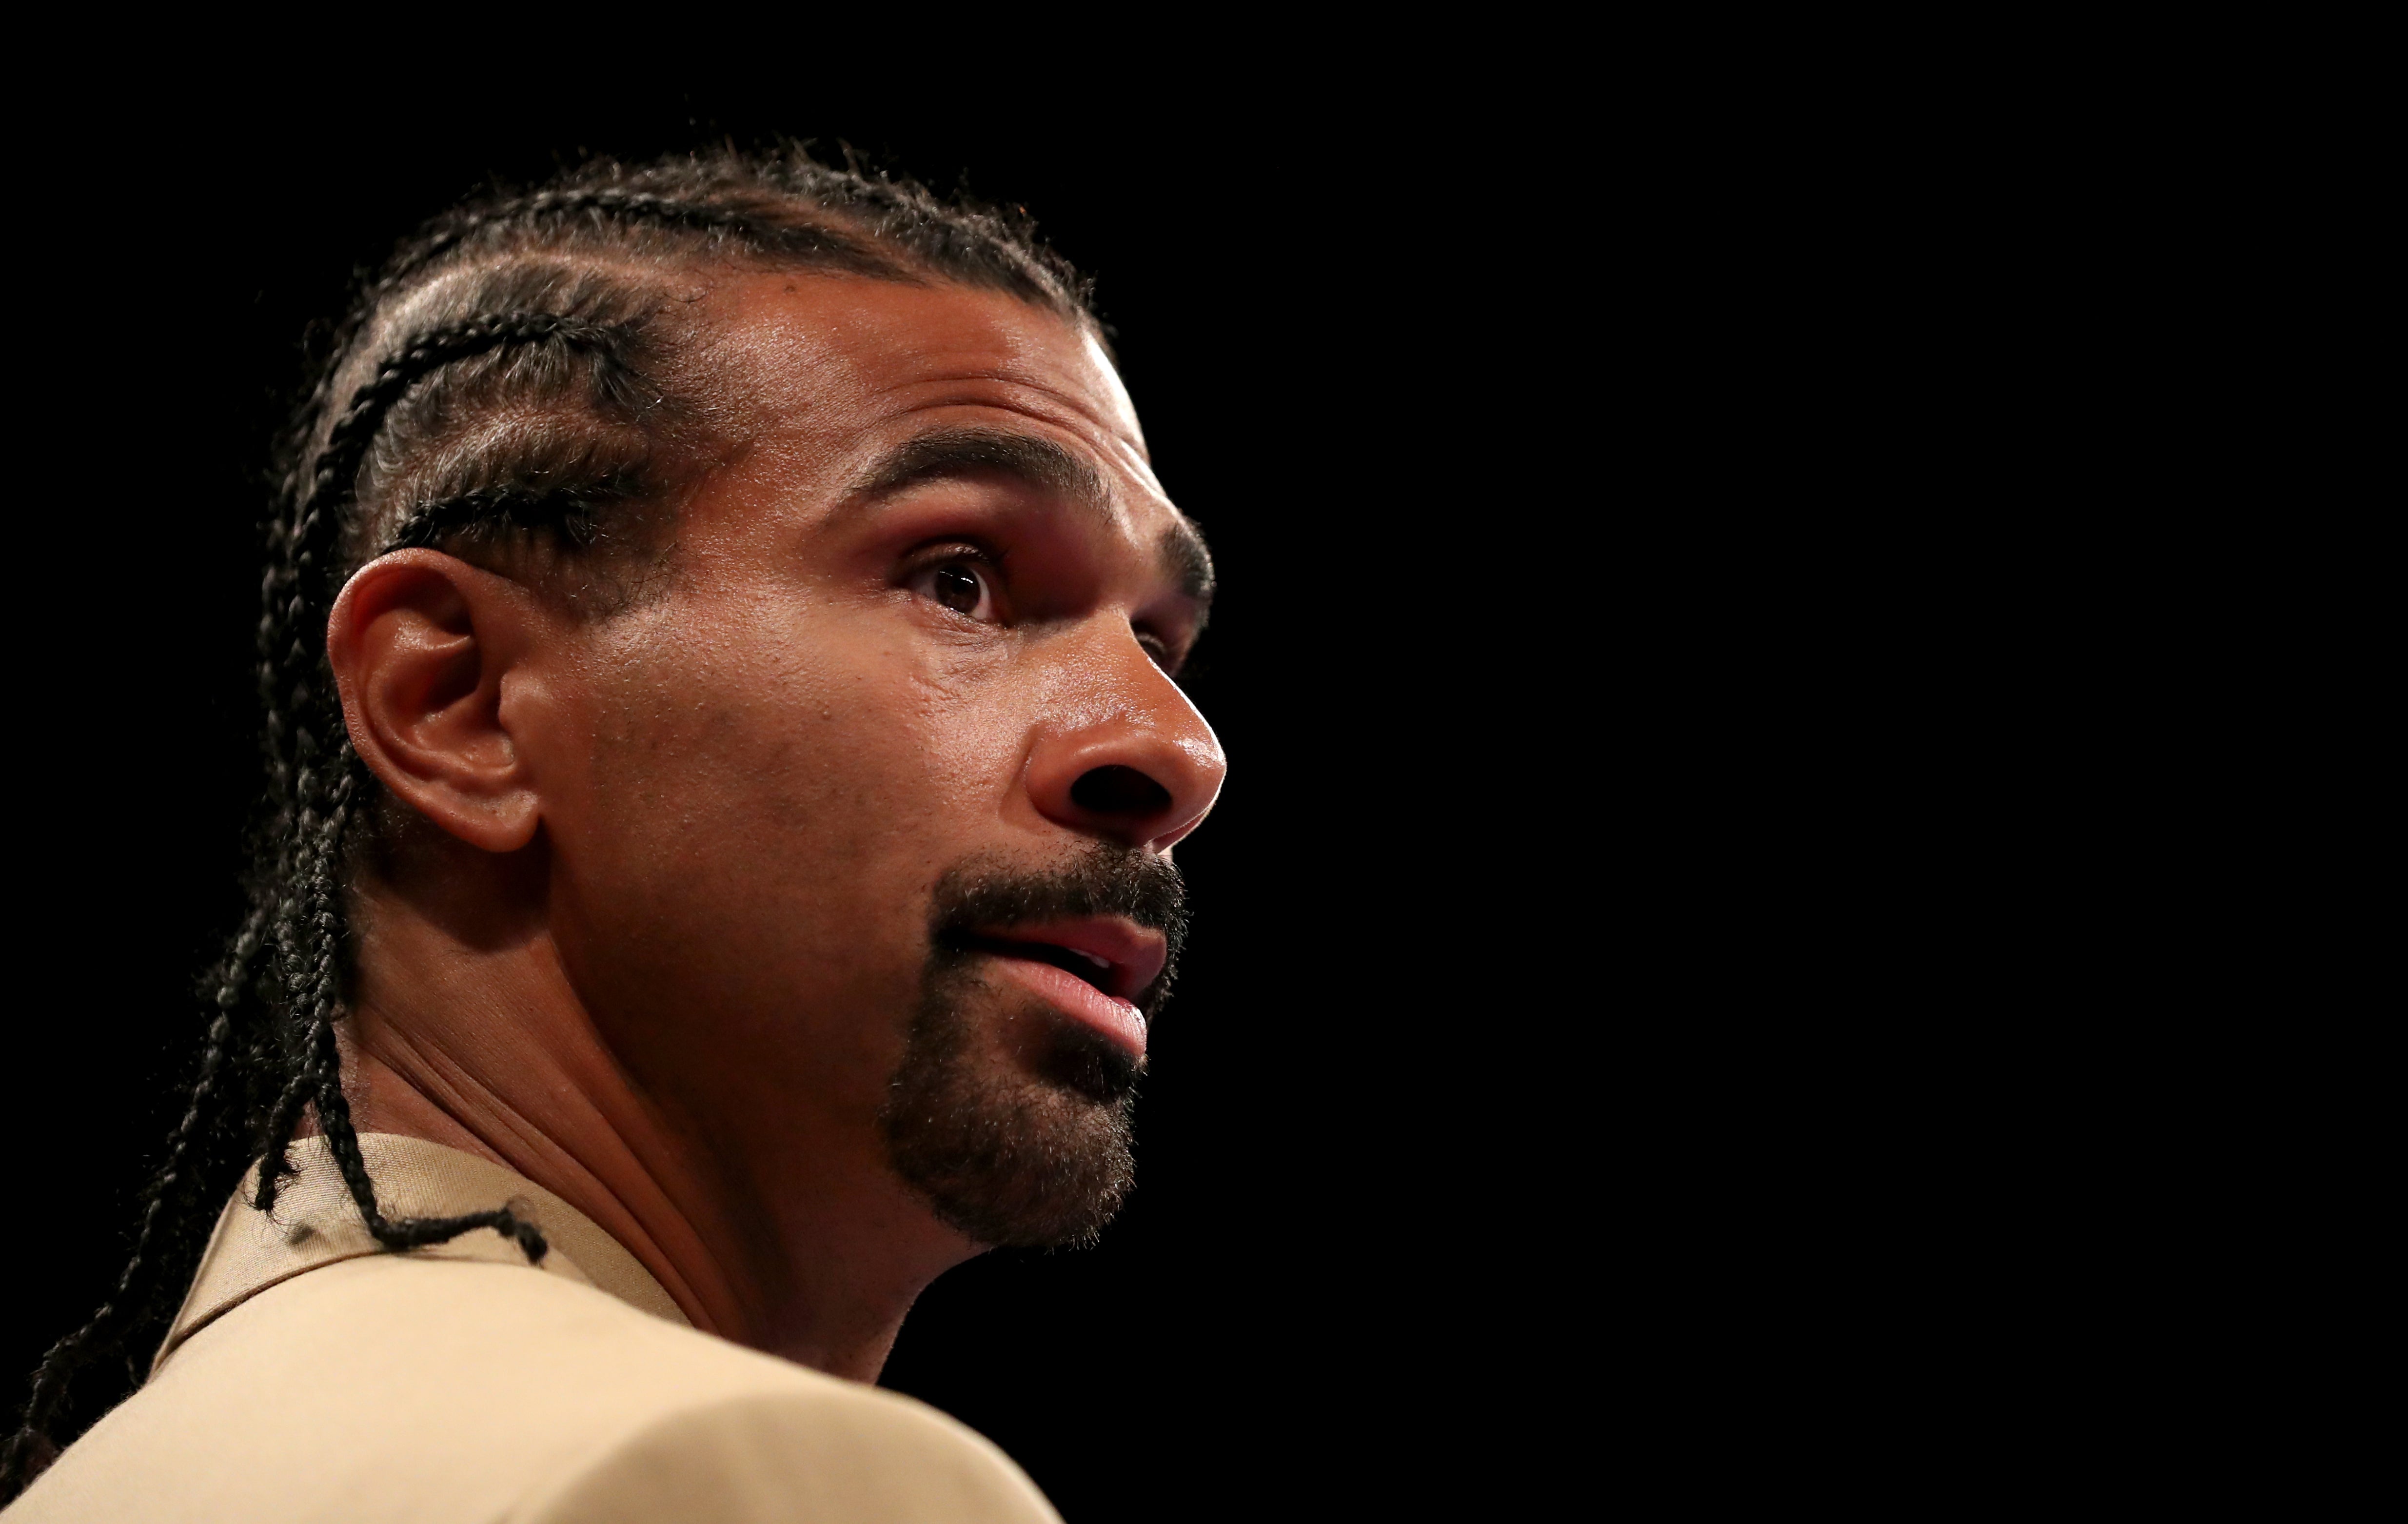 David Haye has been charged with assault (Bradley Collyer/PA)